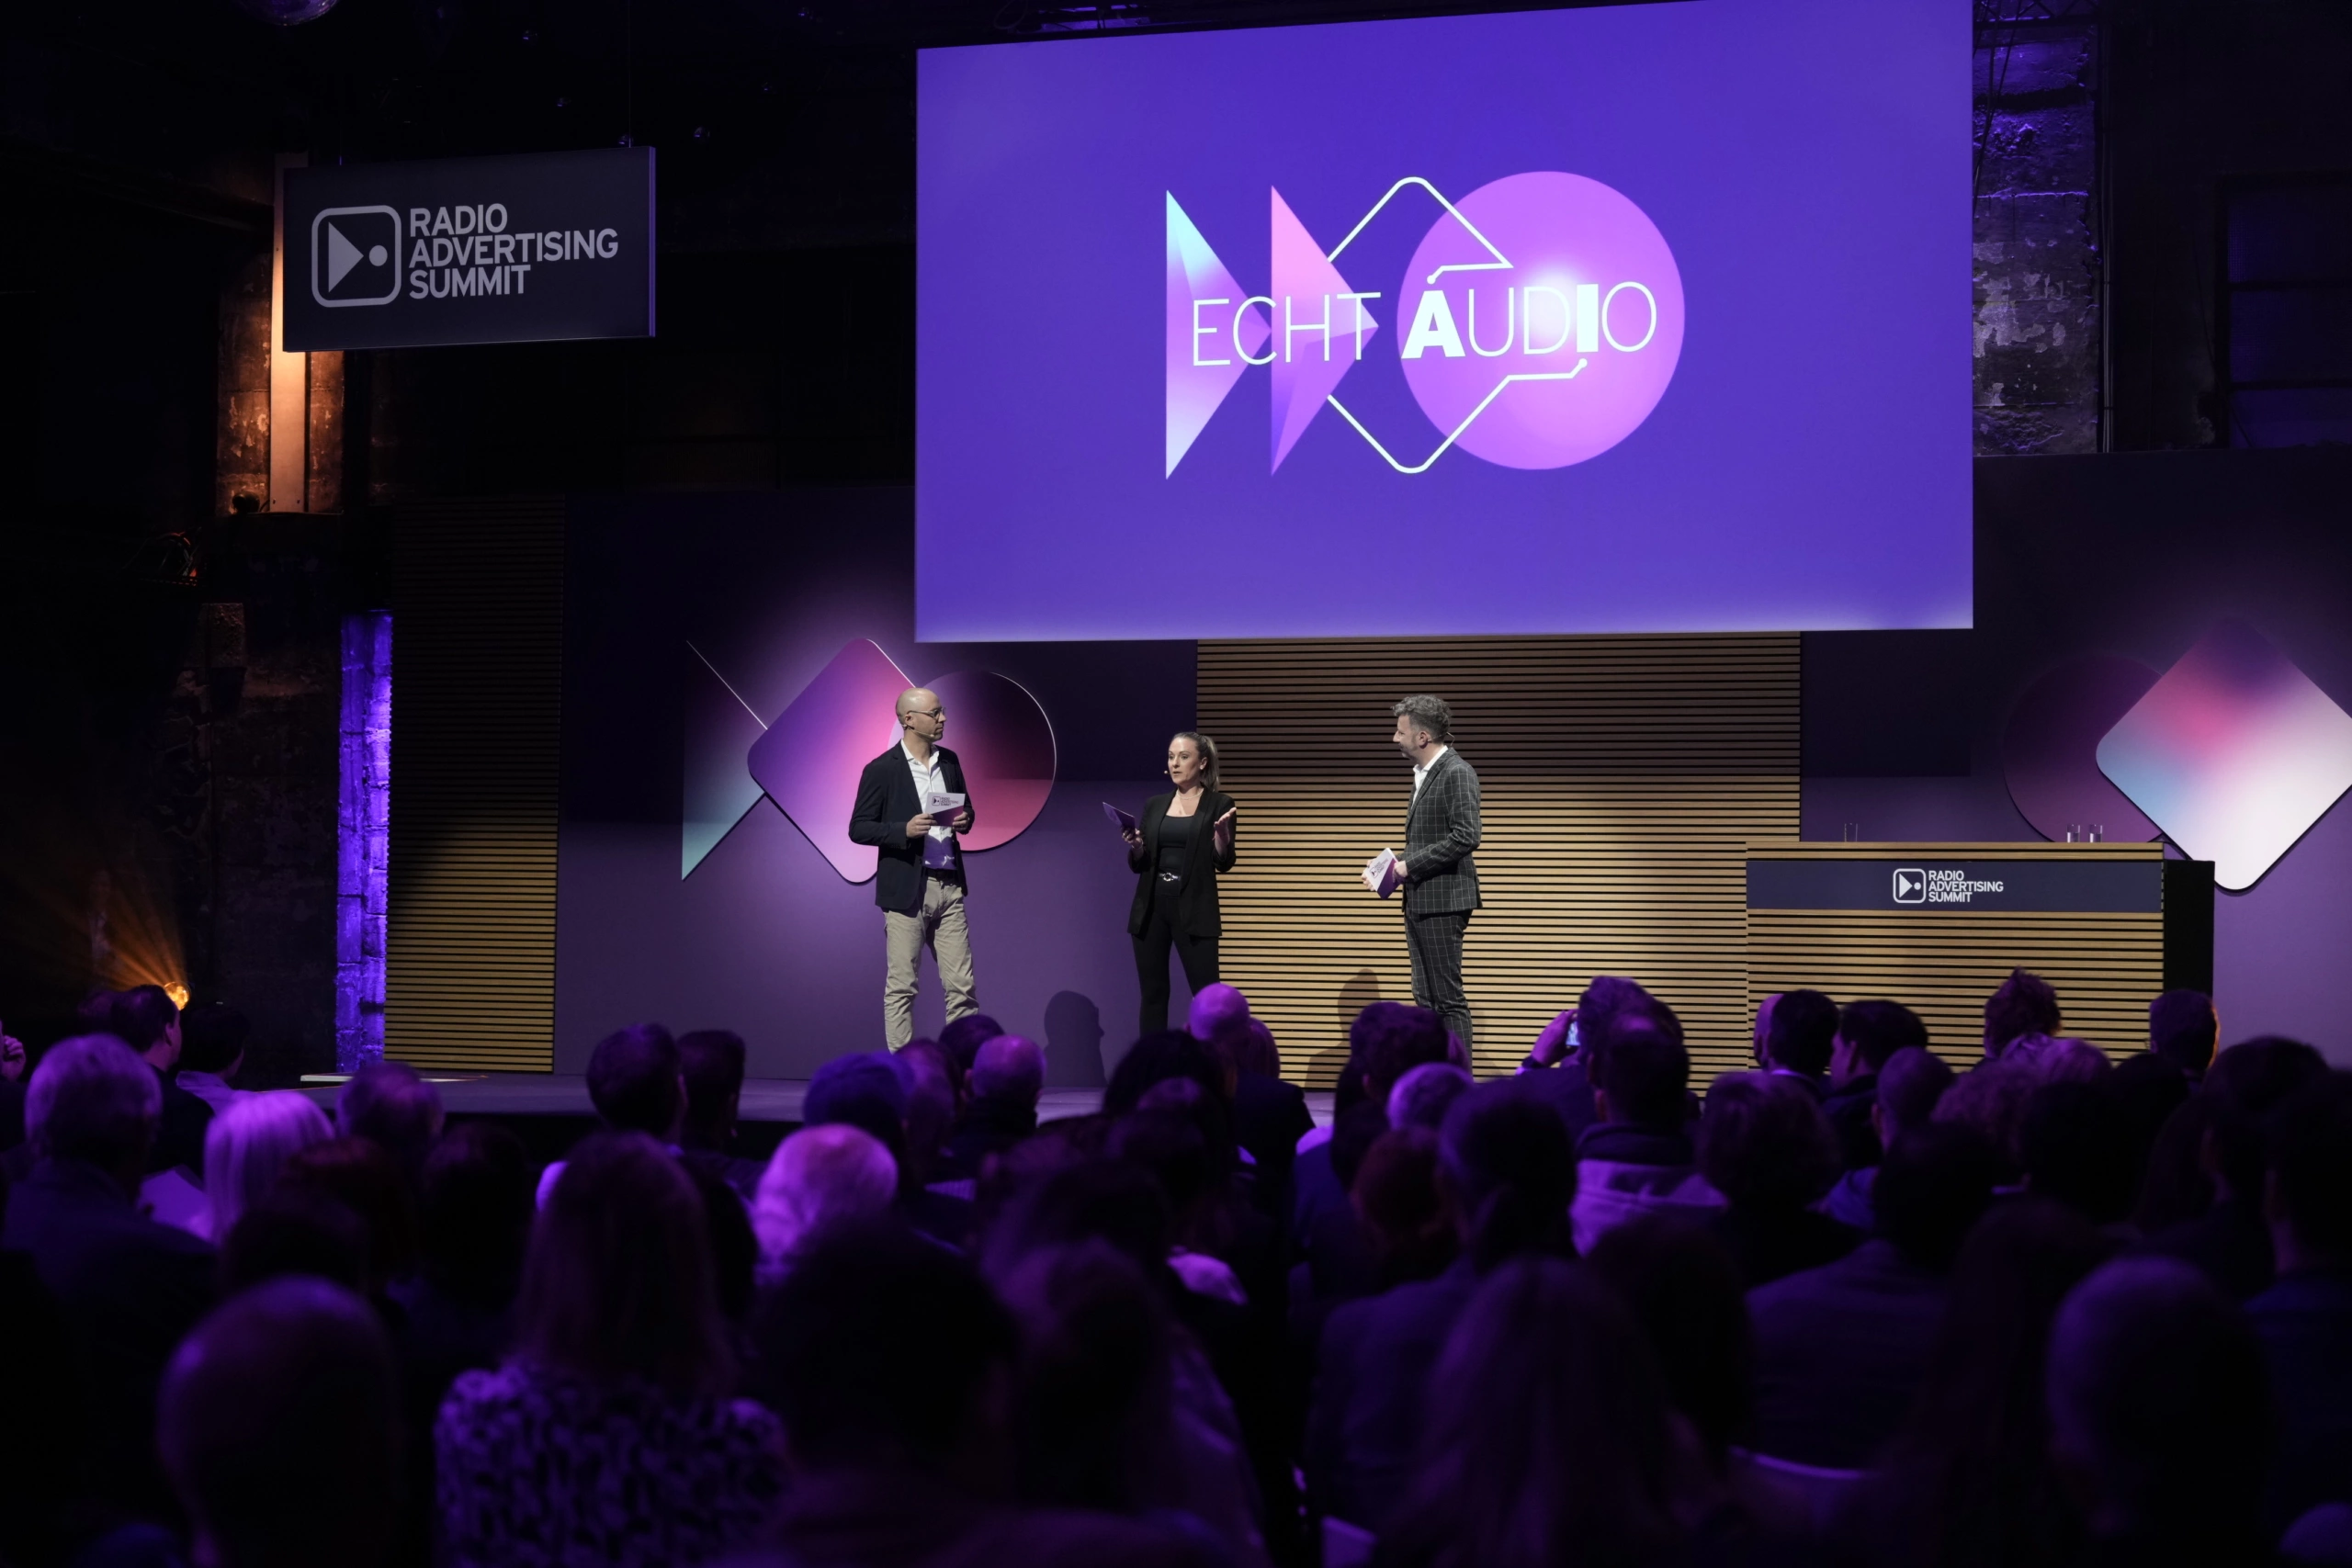 The Radio Advertising Summit 2024 in Cologne, Germany, once again proved itself as a central platform for innovations in audio marketing.